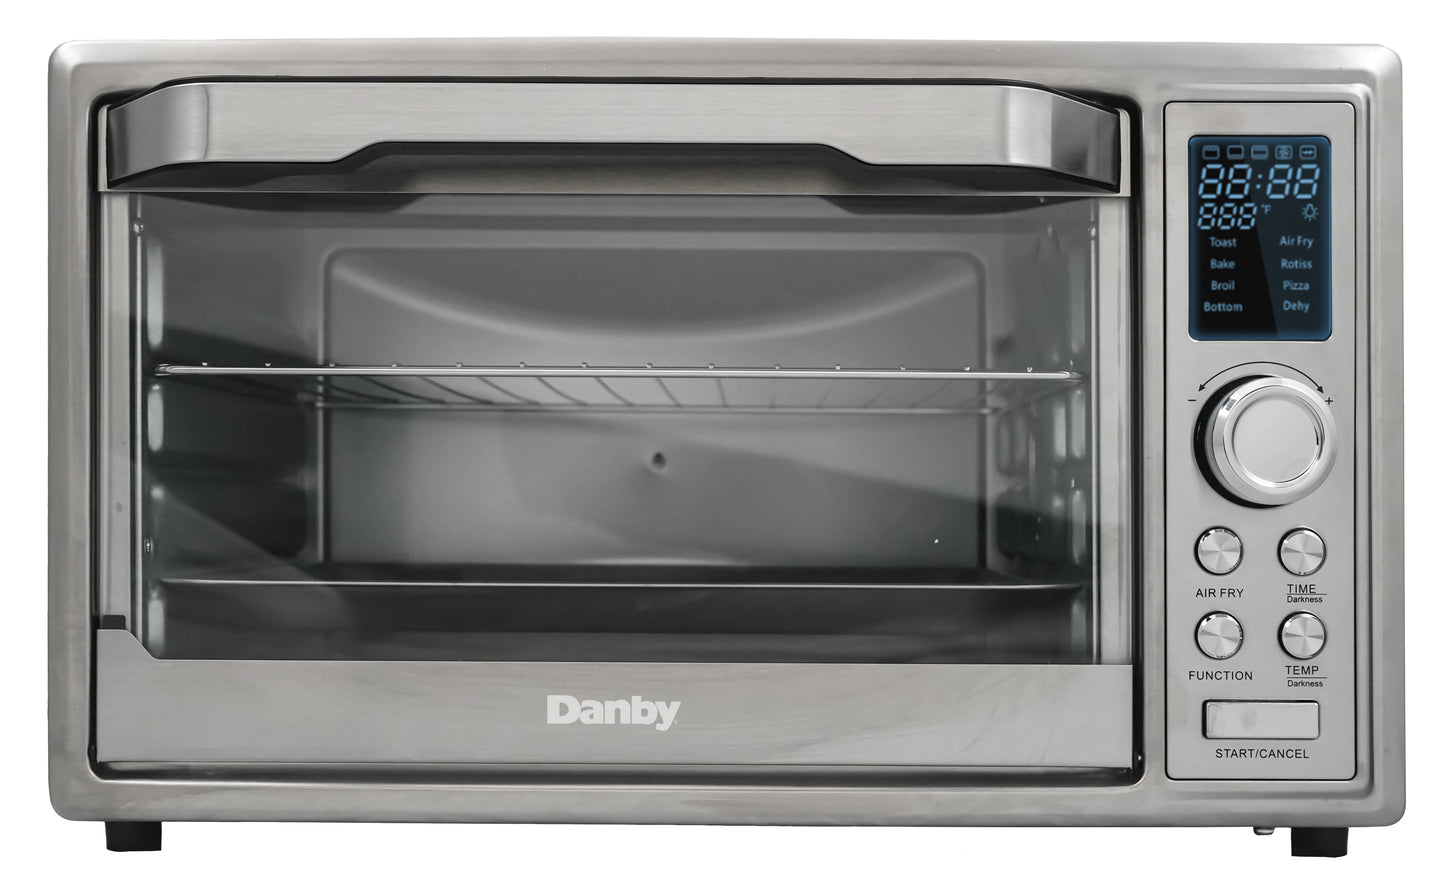 Danby 0.9 cu. ft./25L Convection Toaster Oven with Air Fry Technology, Digital LCD Display - DBTO0961ABSS